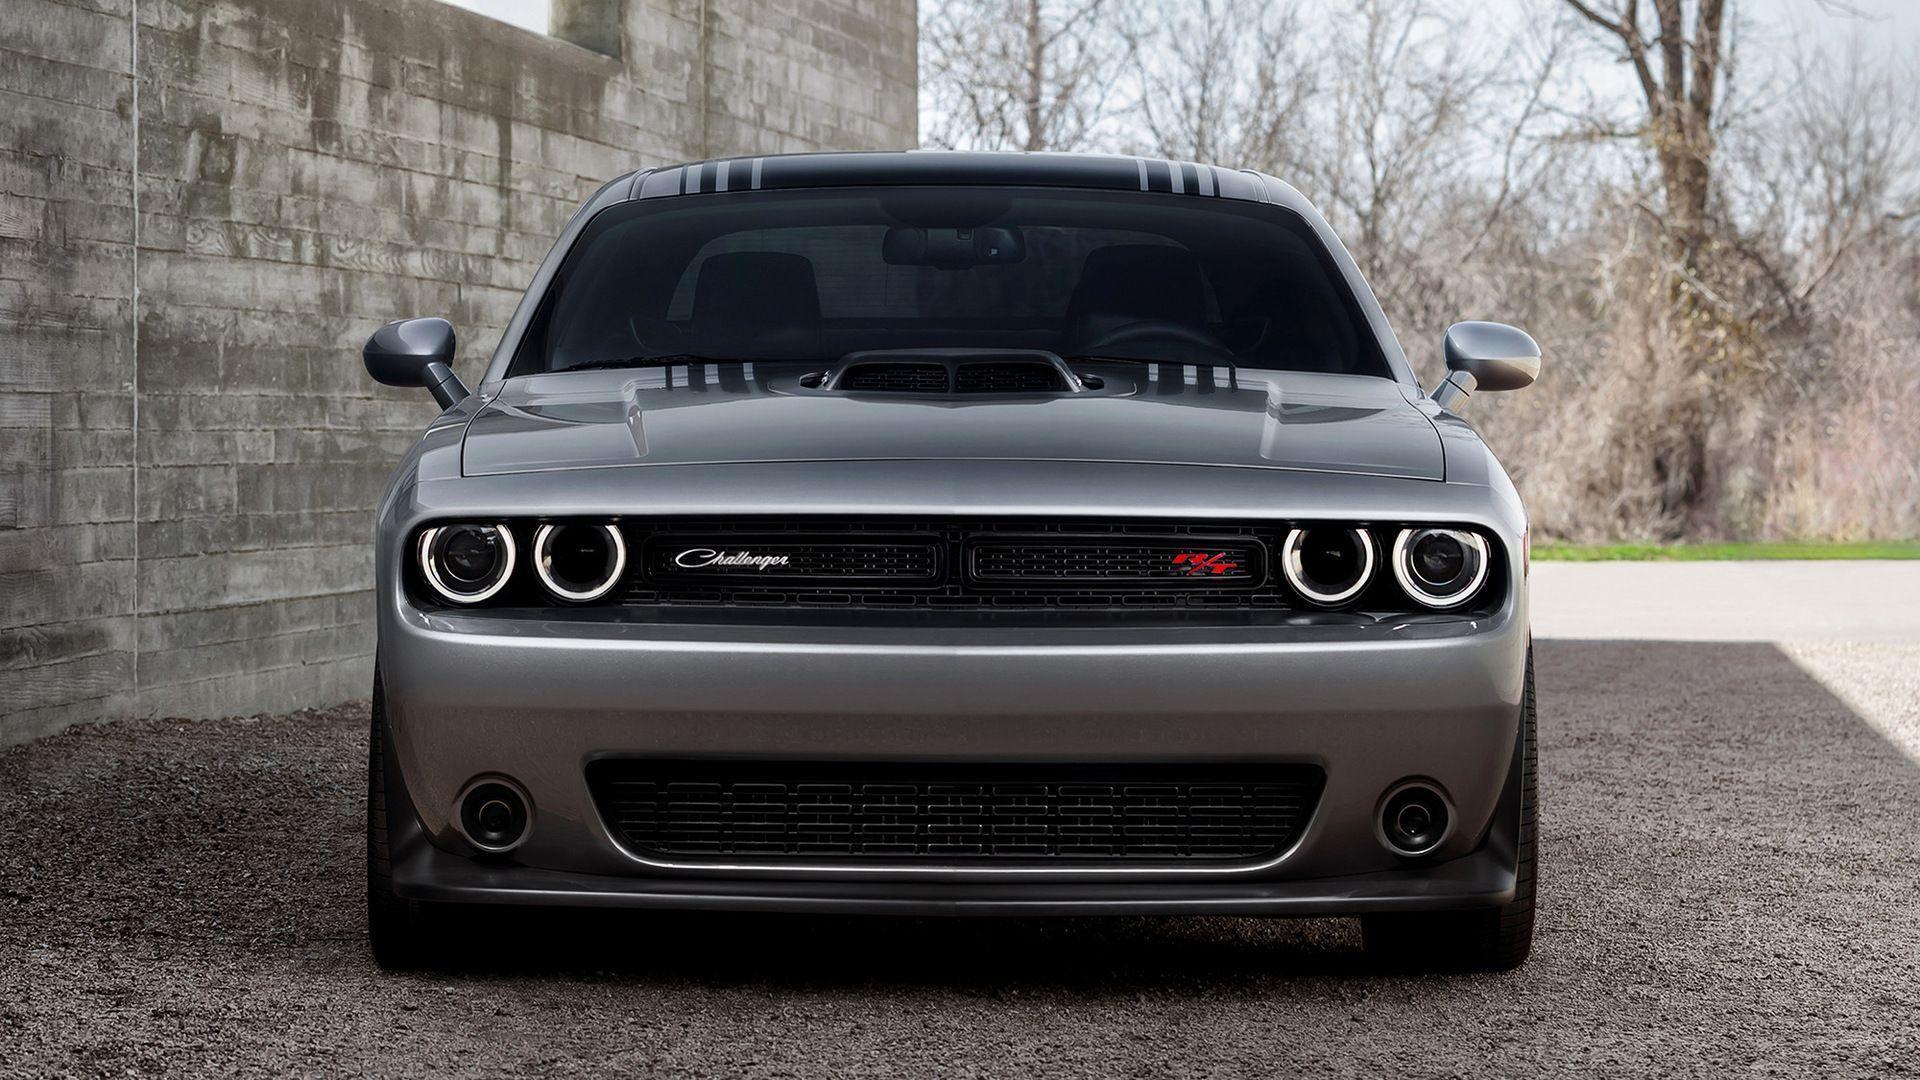 Dodge Challenger Wallpaper and Picture